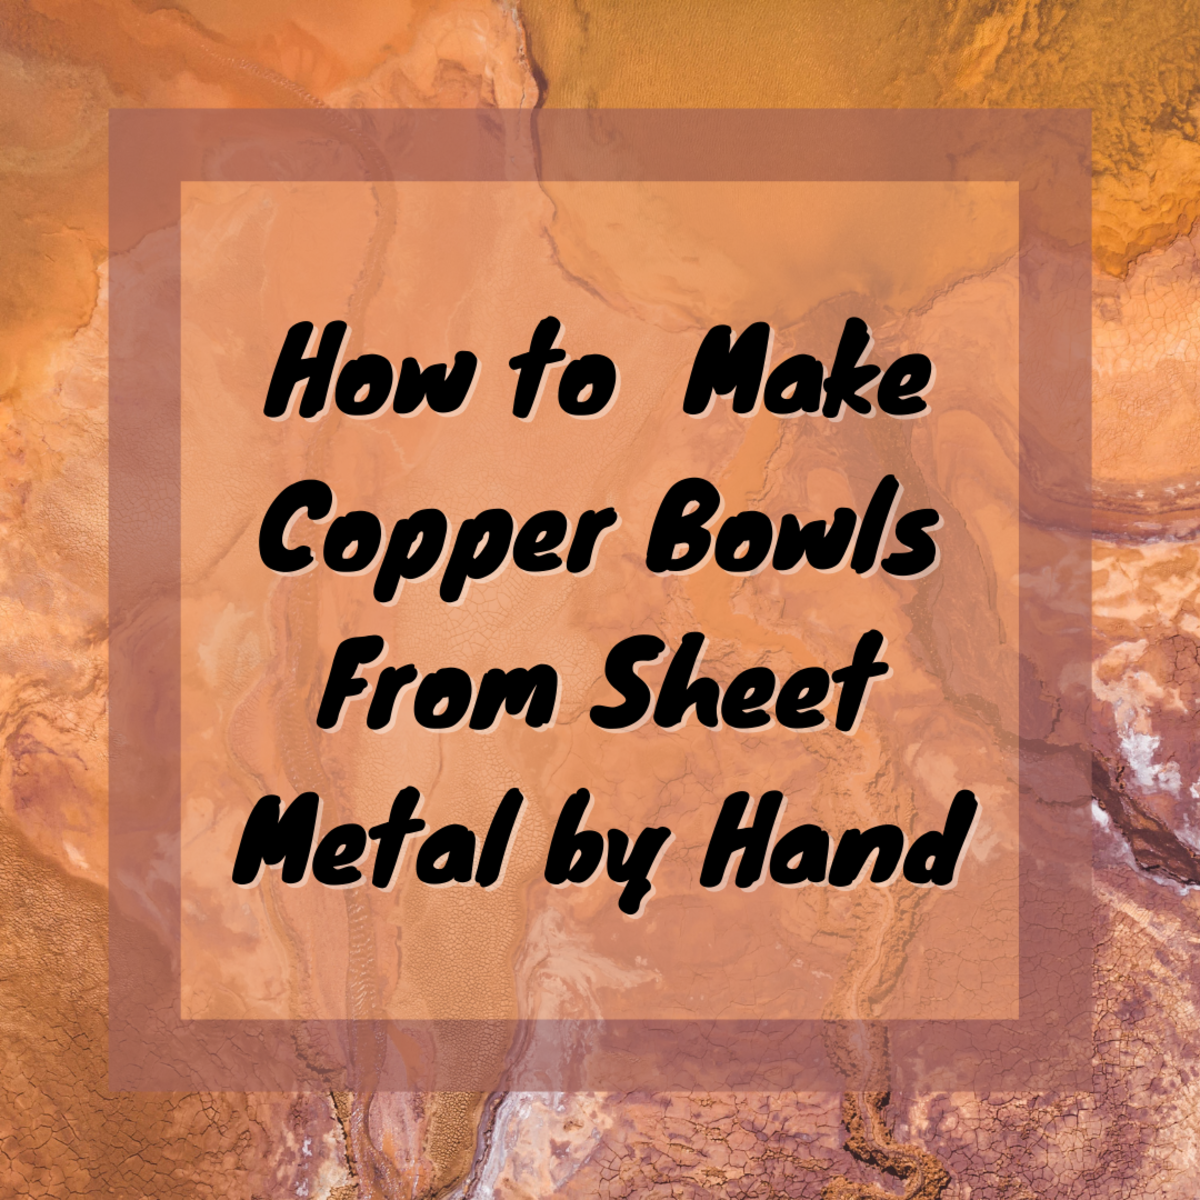 How to Form Copper Bowls From Sheet Metal by Hand - FeltMagnet